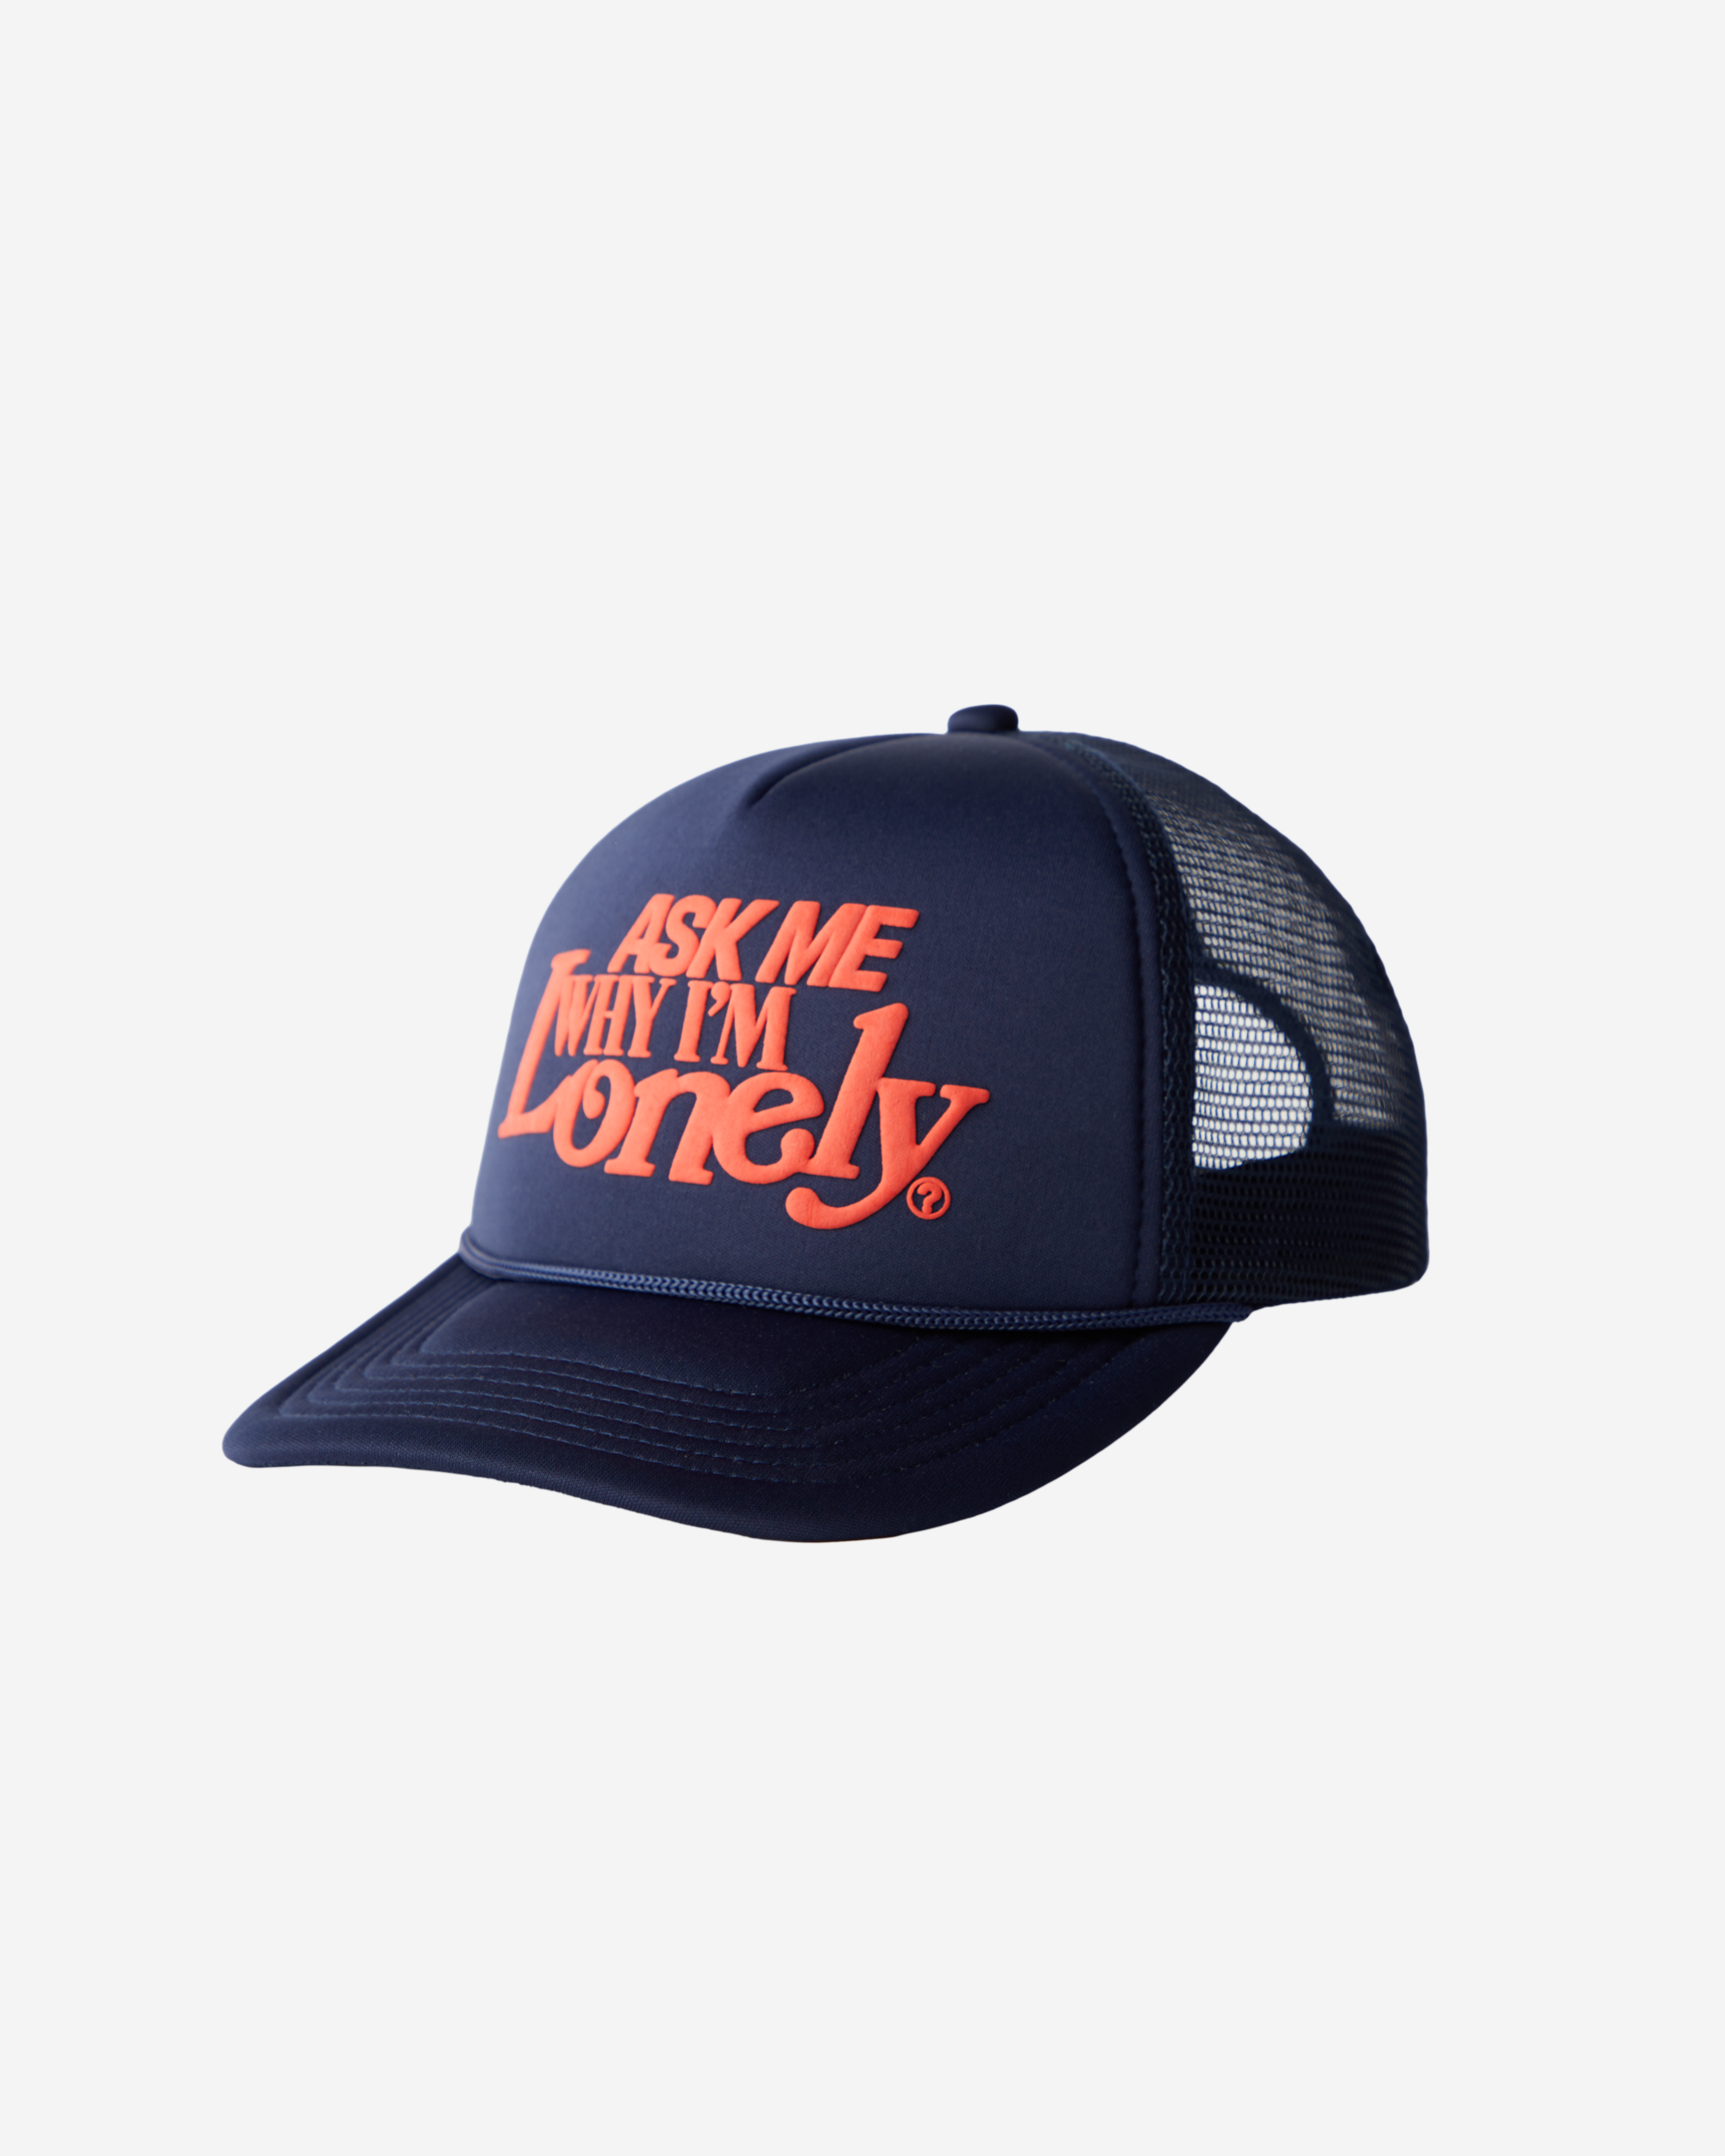 Ask Me Why I'm Lonely Trucker Hat